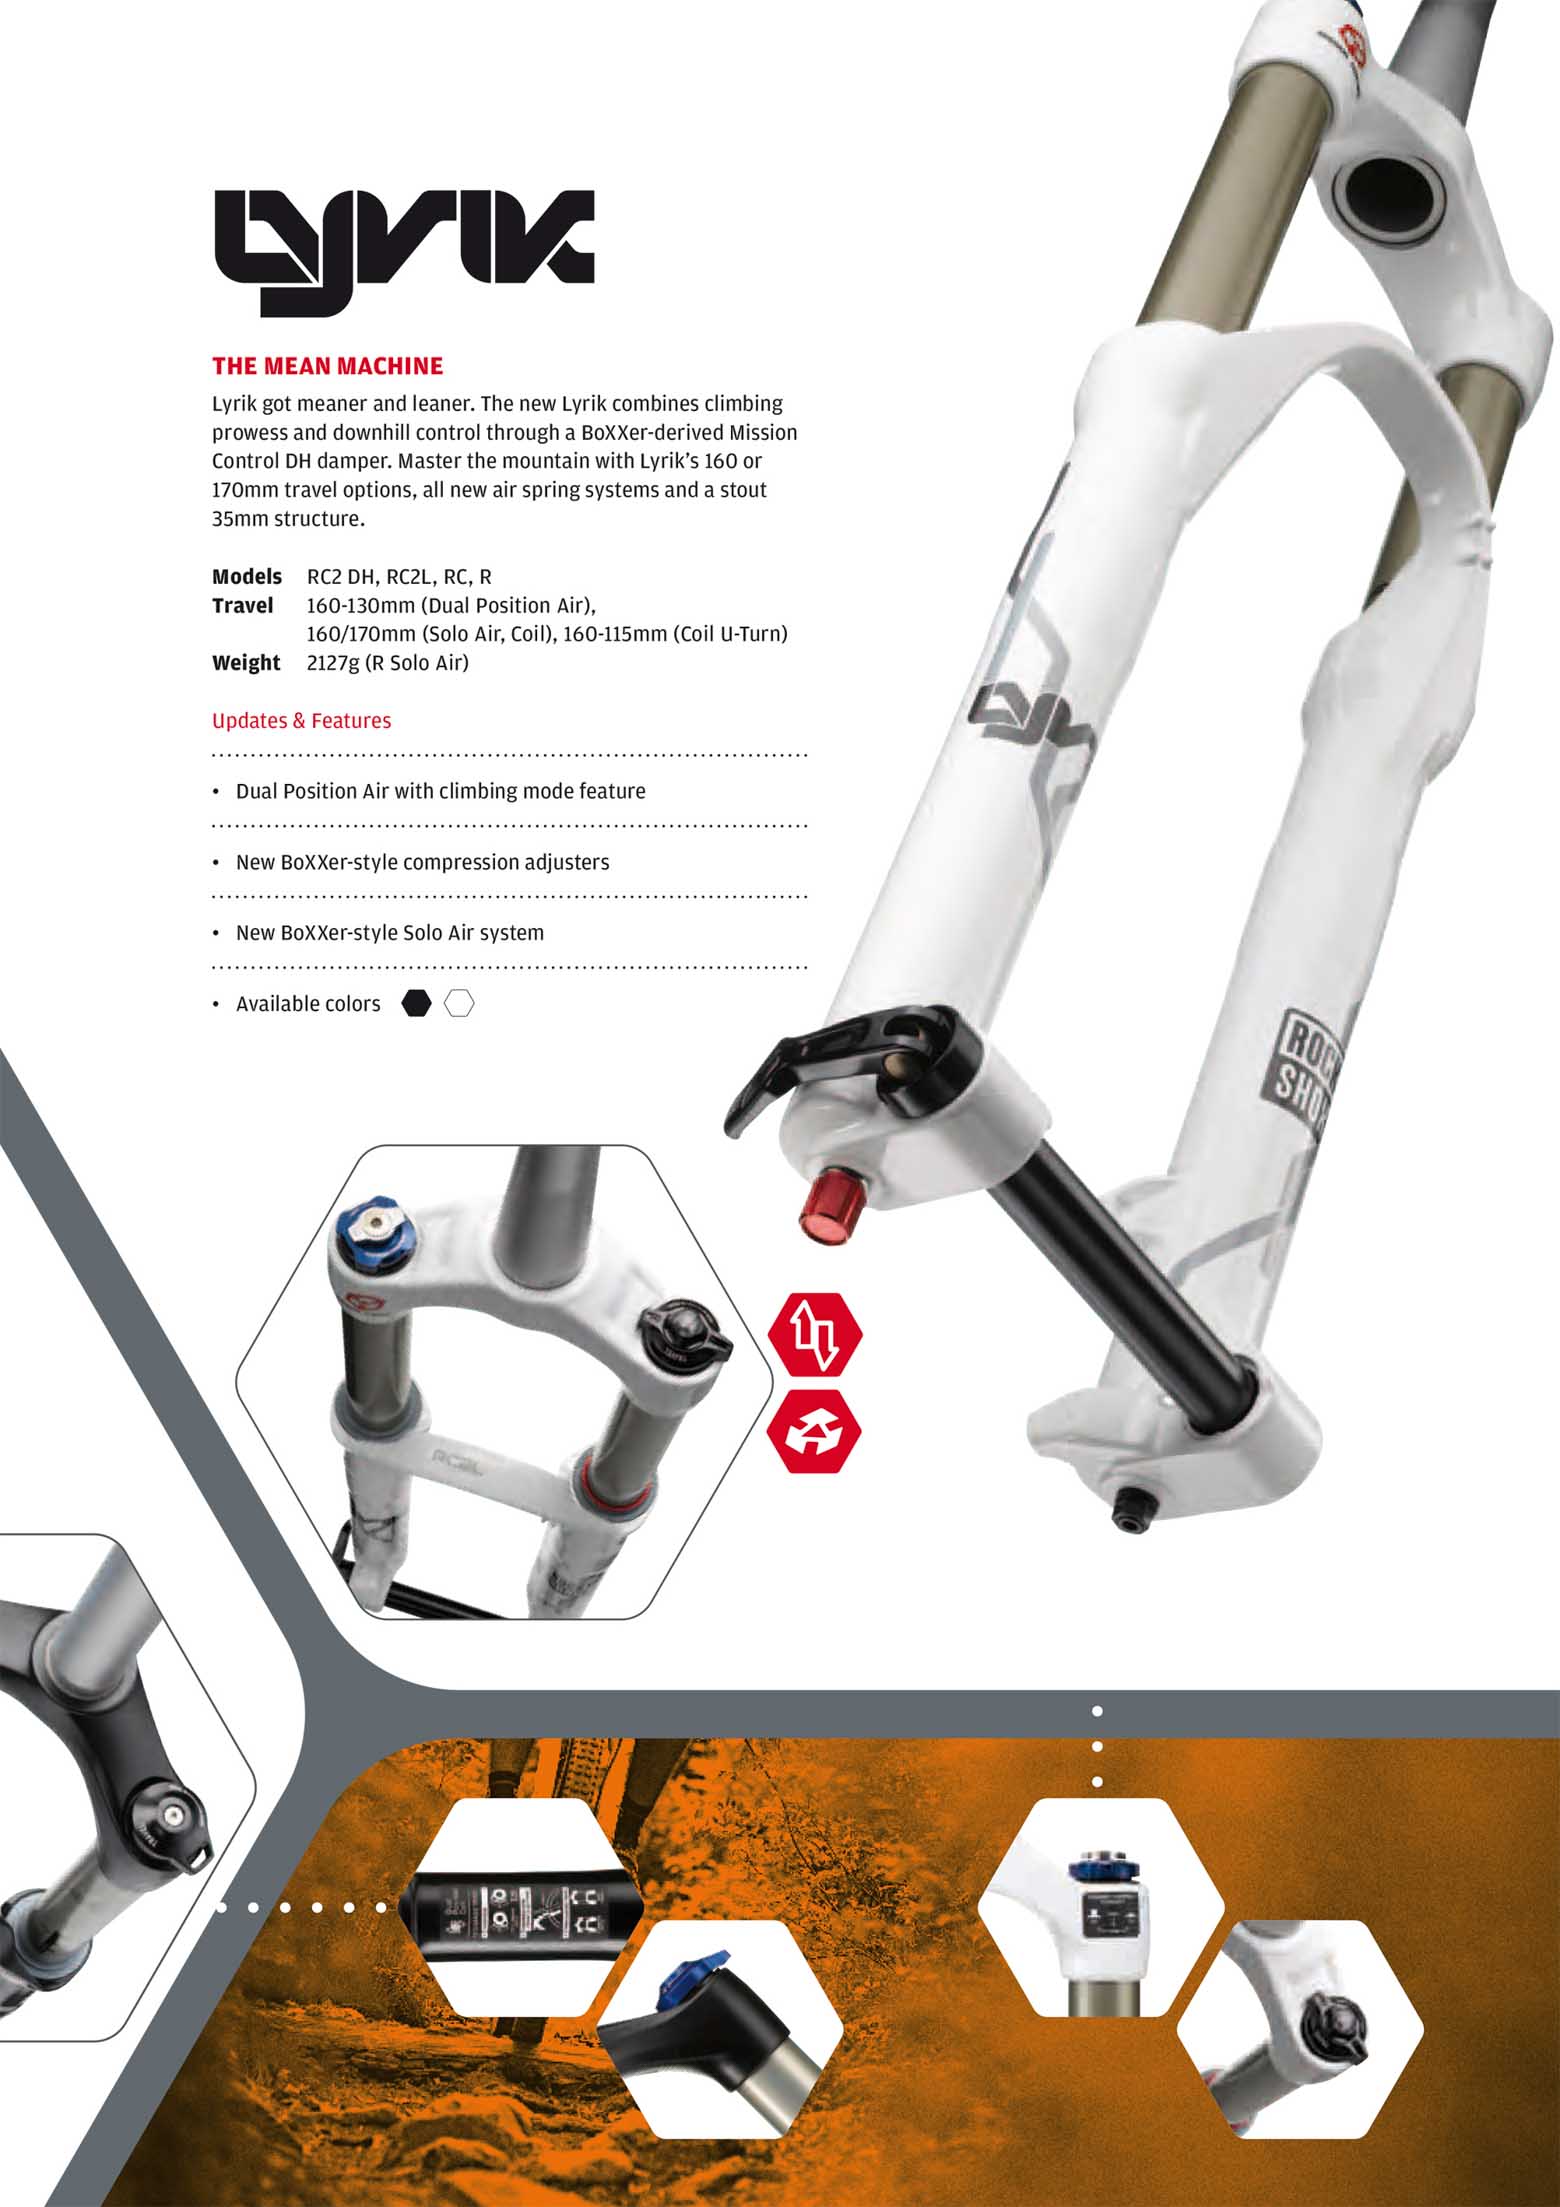 SRAM 2012 Product Collections page 093 main image